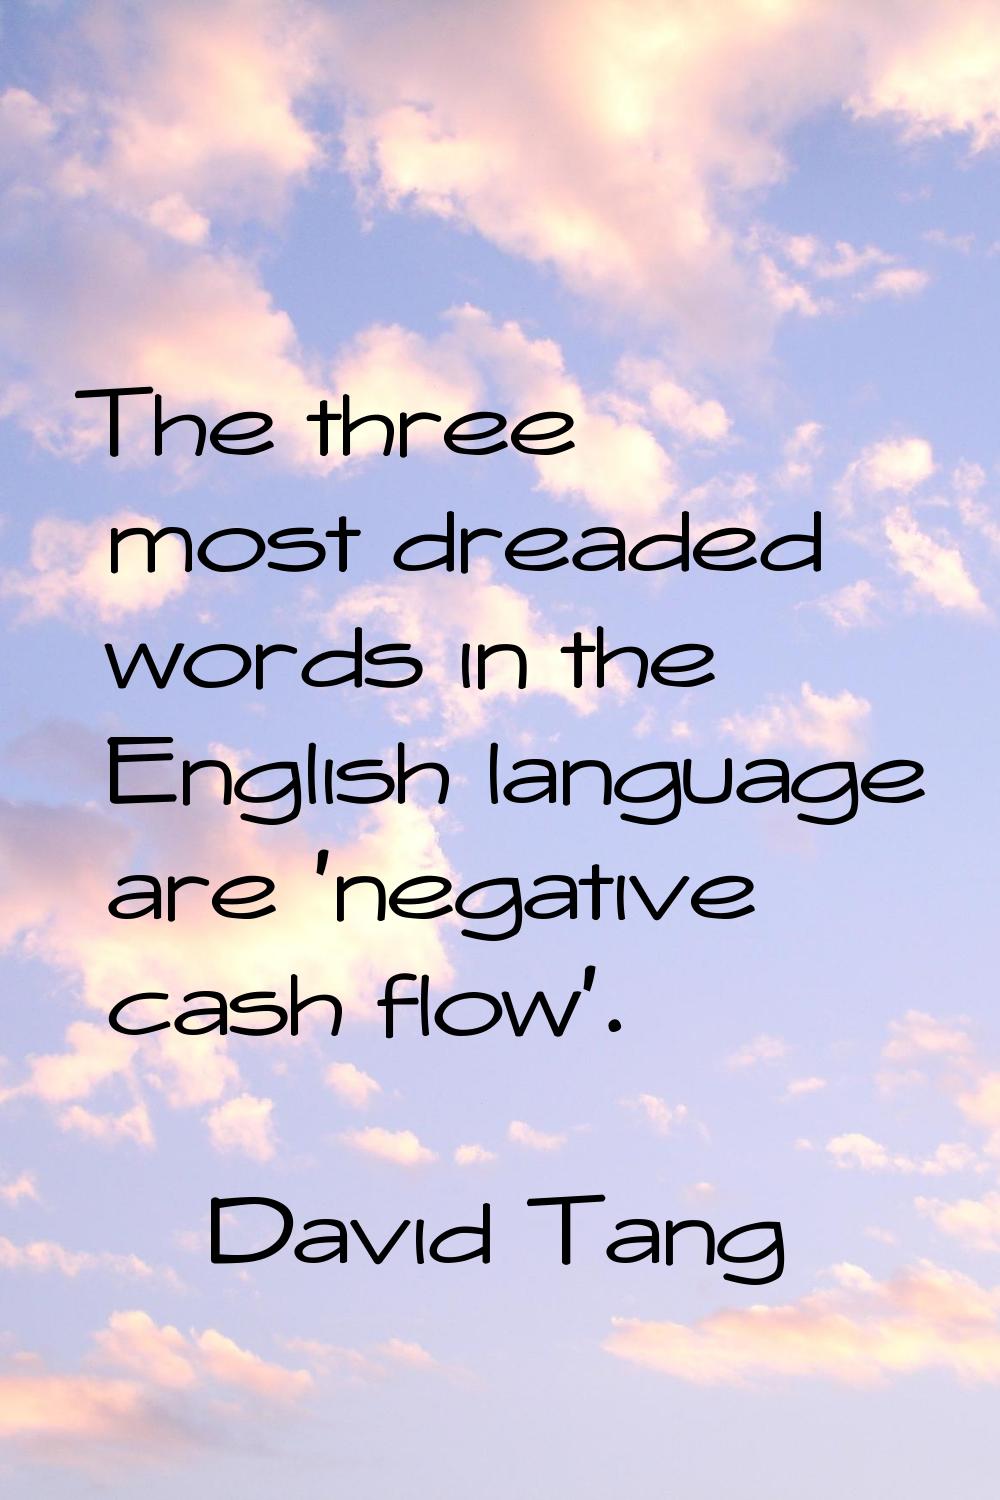 The three most dreaded words in the English language are 'negative cash flow'.